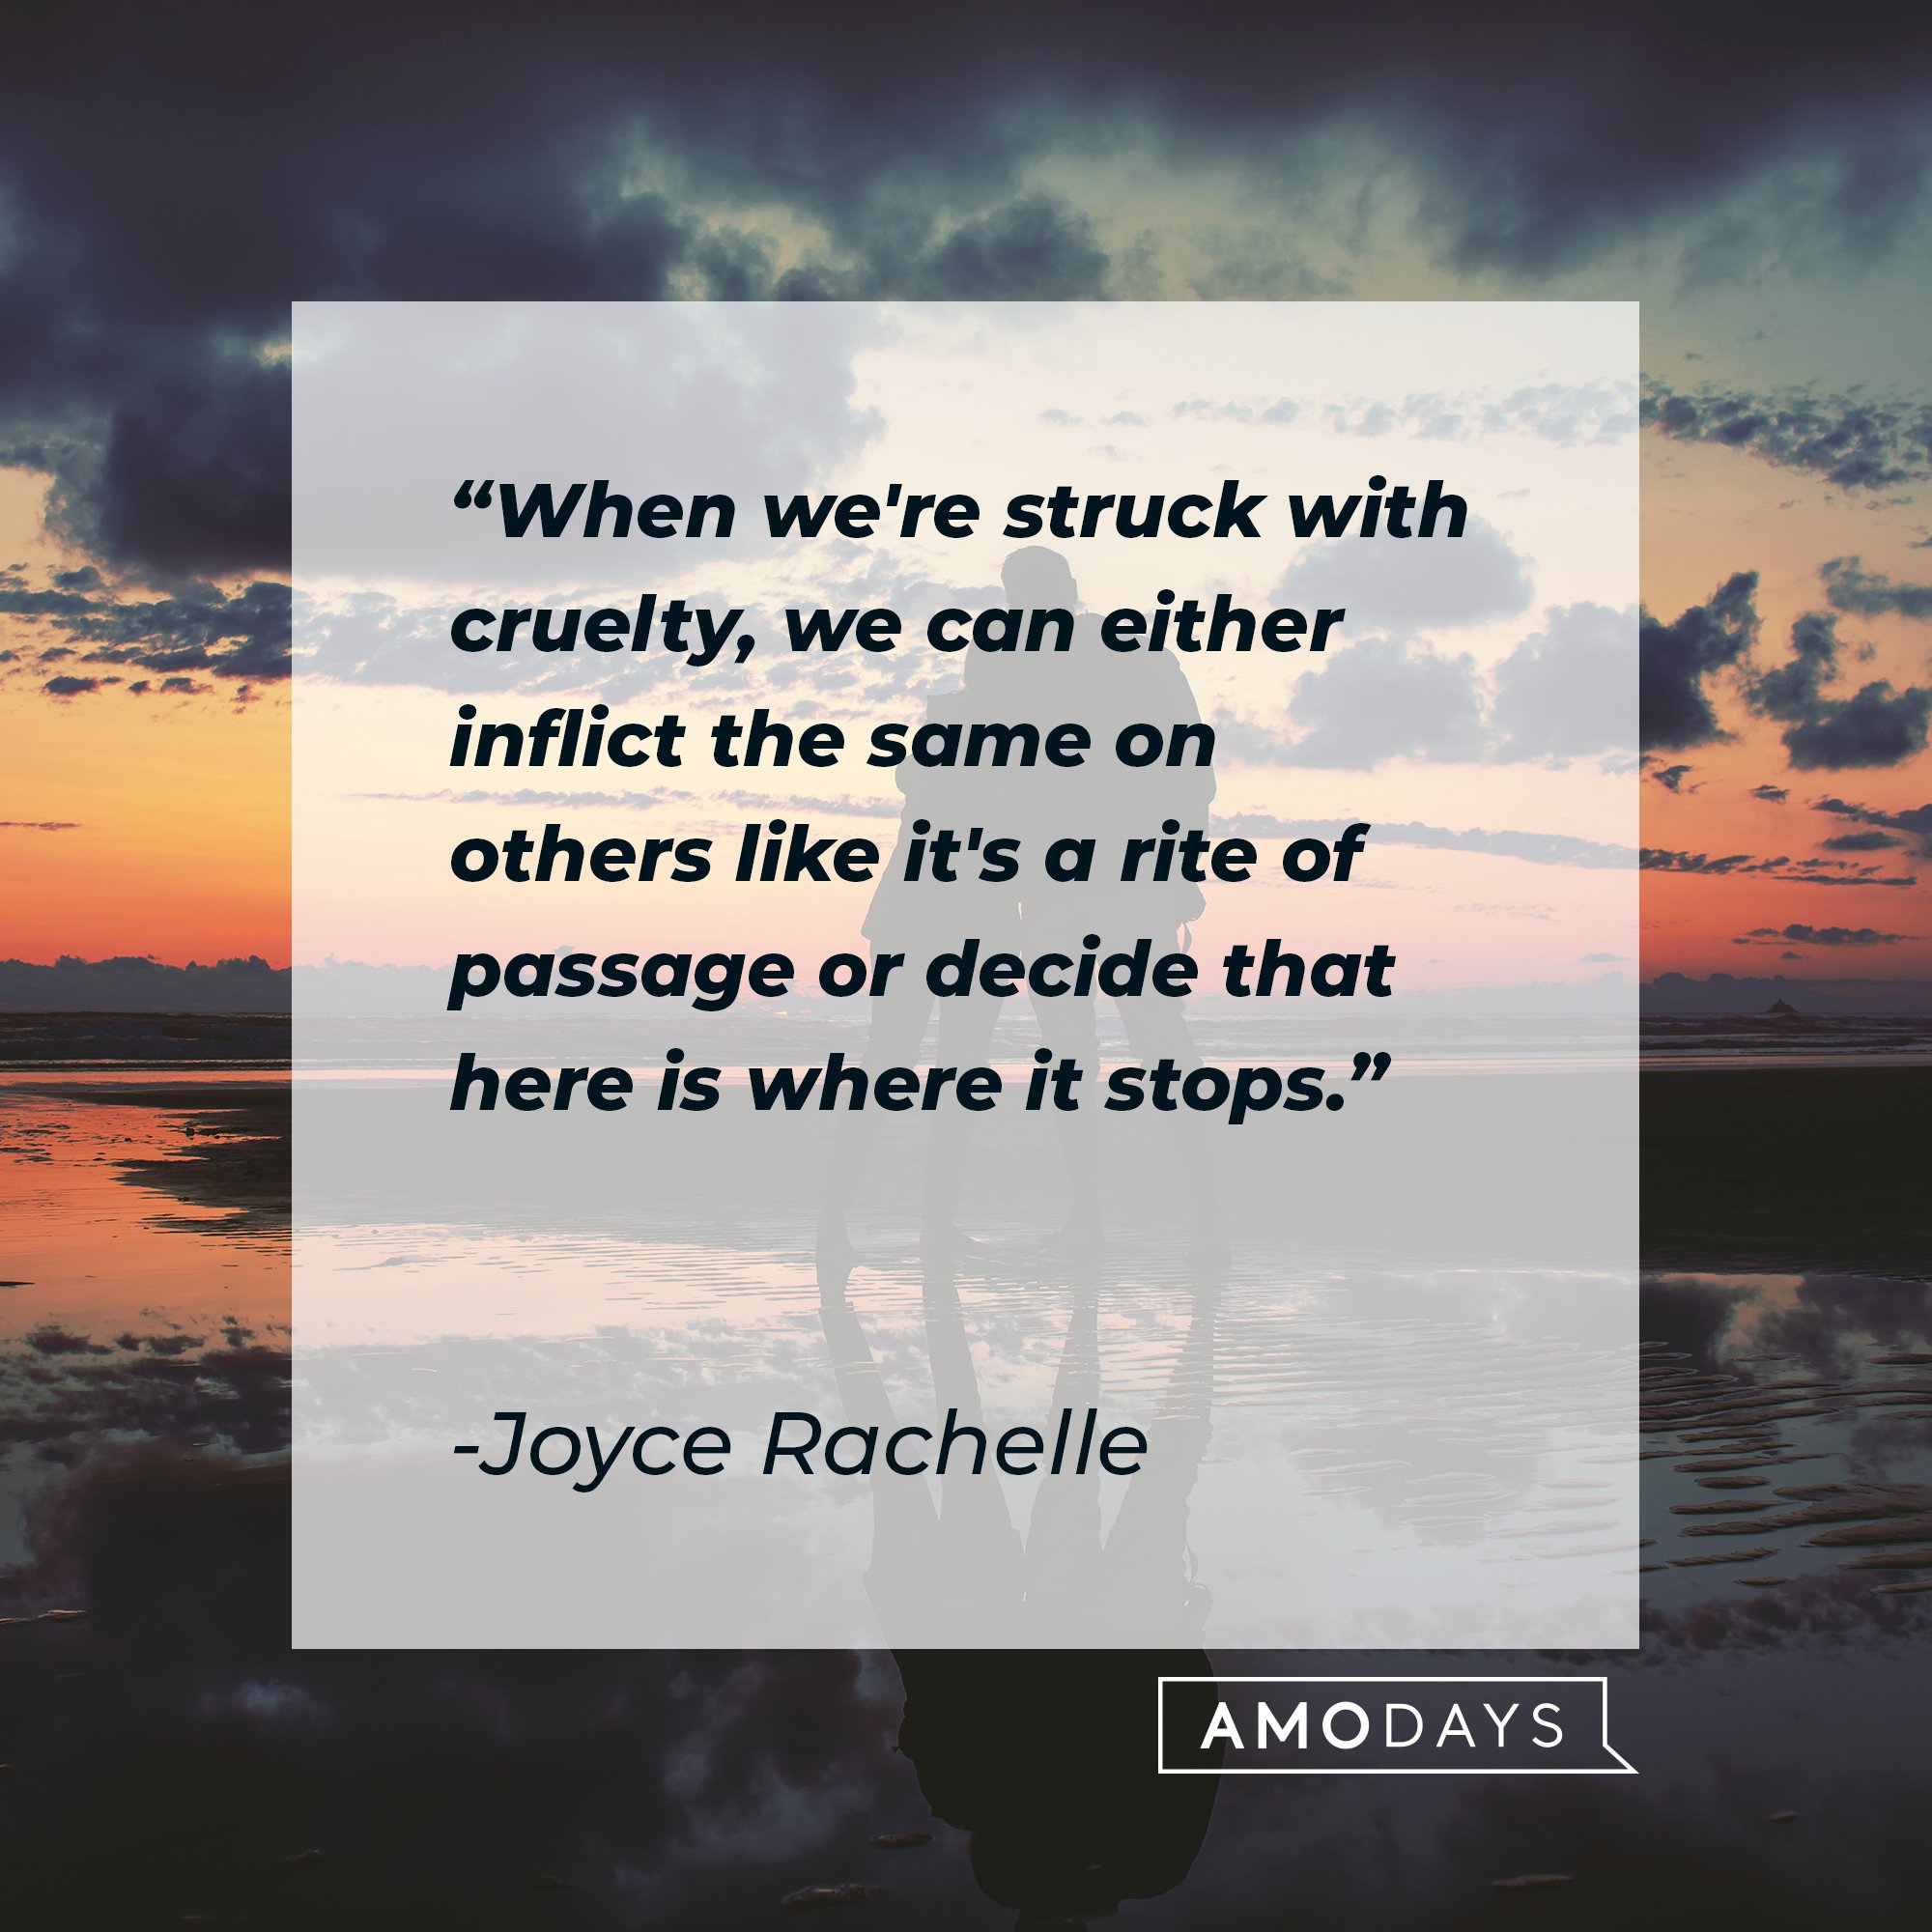 Joyce Rachelle’s quote: “When we're struck with cruelty, we can either inflict the same on others like it's a rite of passage, or decide that here is where it stops.” | Image: AmoDays  